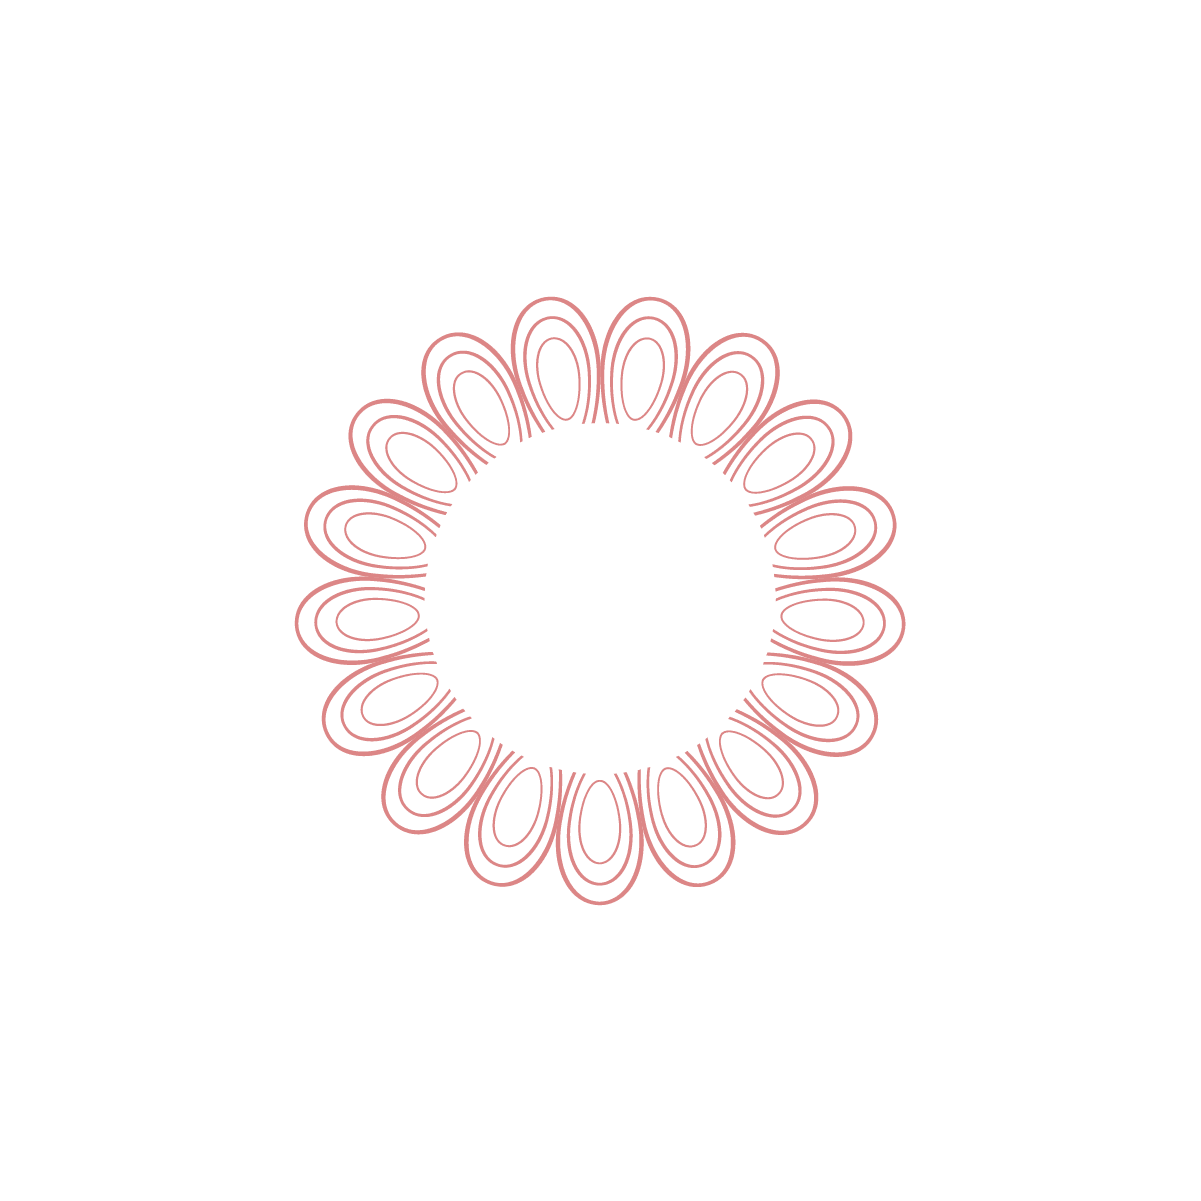 intricate floral mandalas in minimalist style with delicate linework